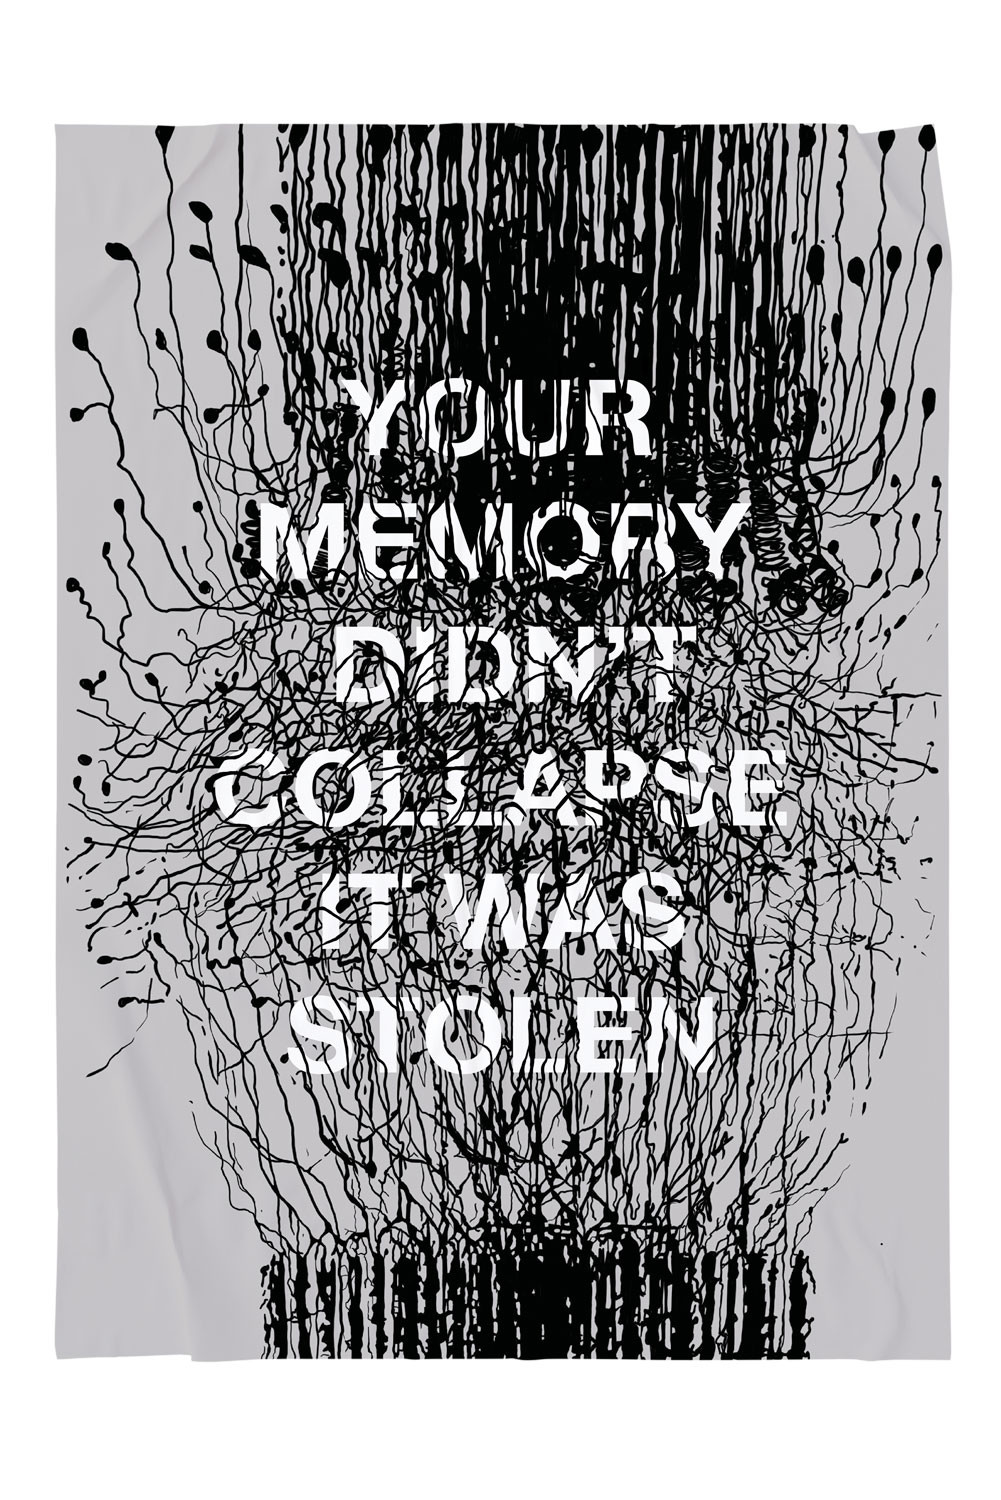 'Stolen Memory'; Poster. Highlighting the issue of digital dependency causing memory loss